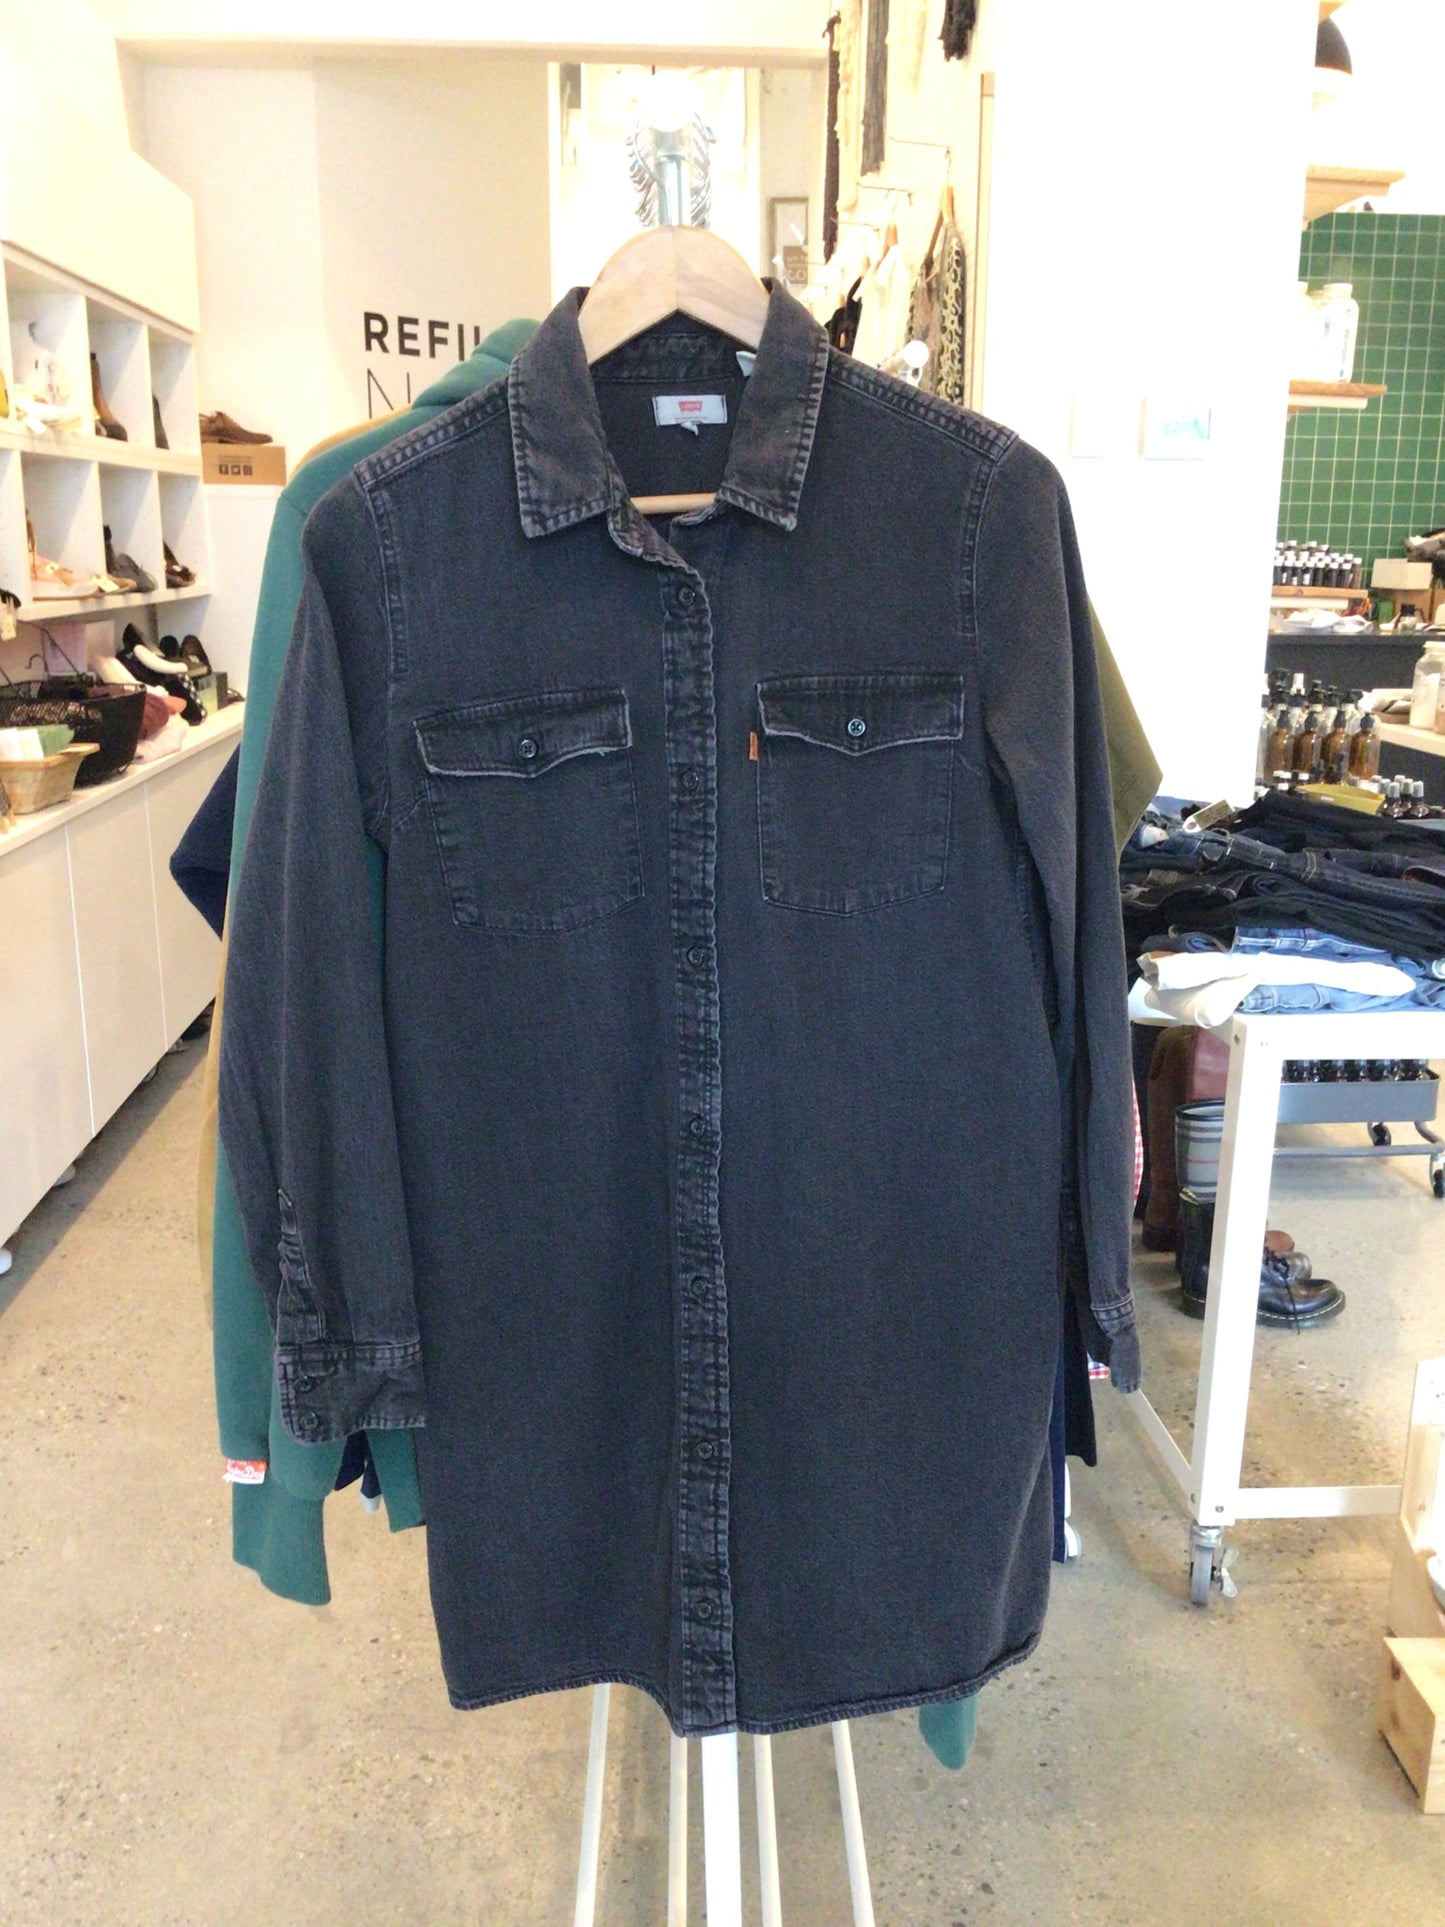 Consignment 4475-05 Levis black jeans shirt dress. Size small.